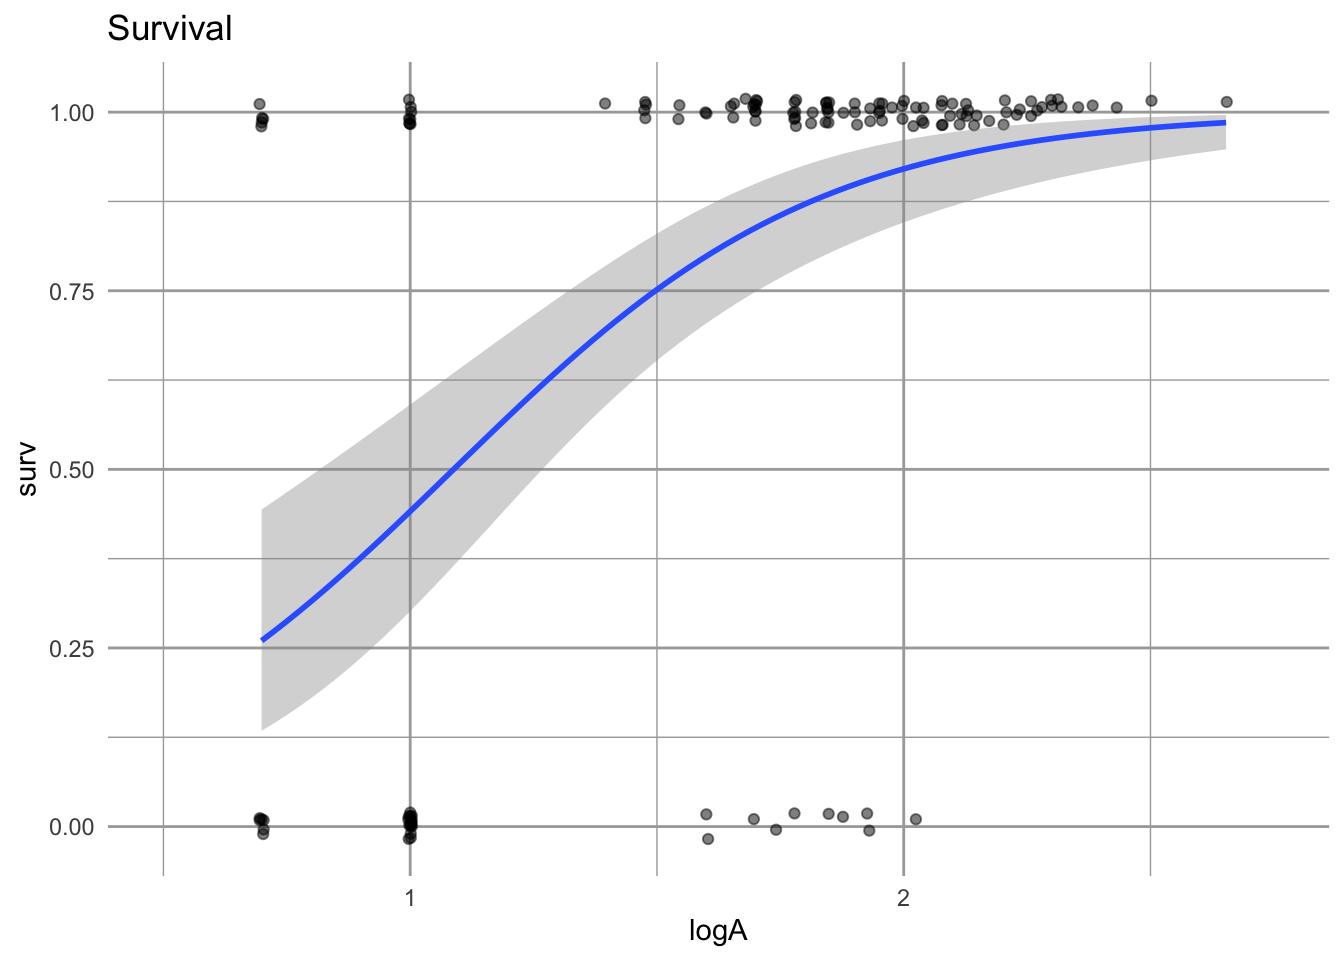 Survival is represented as surviving (1) or not surviving (0). The probability of surviving to the next year, given a size in the first year, is estimated using logistic regression. The fitted line gives us a point estimate for survival for any log-size. The grey band represents uncertainty.